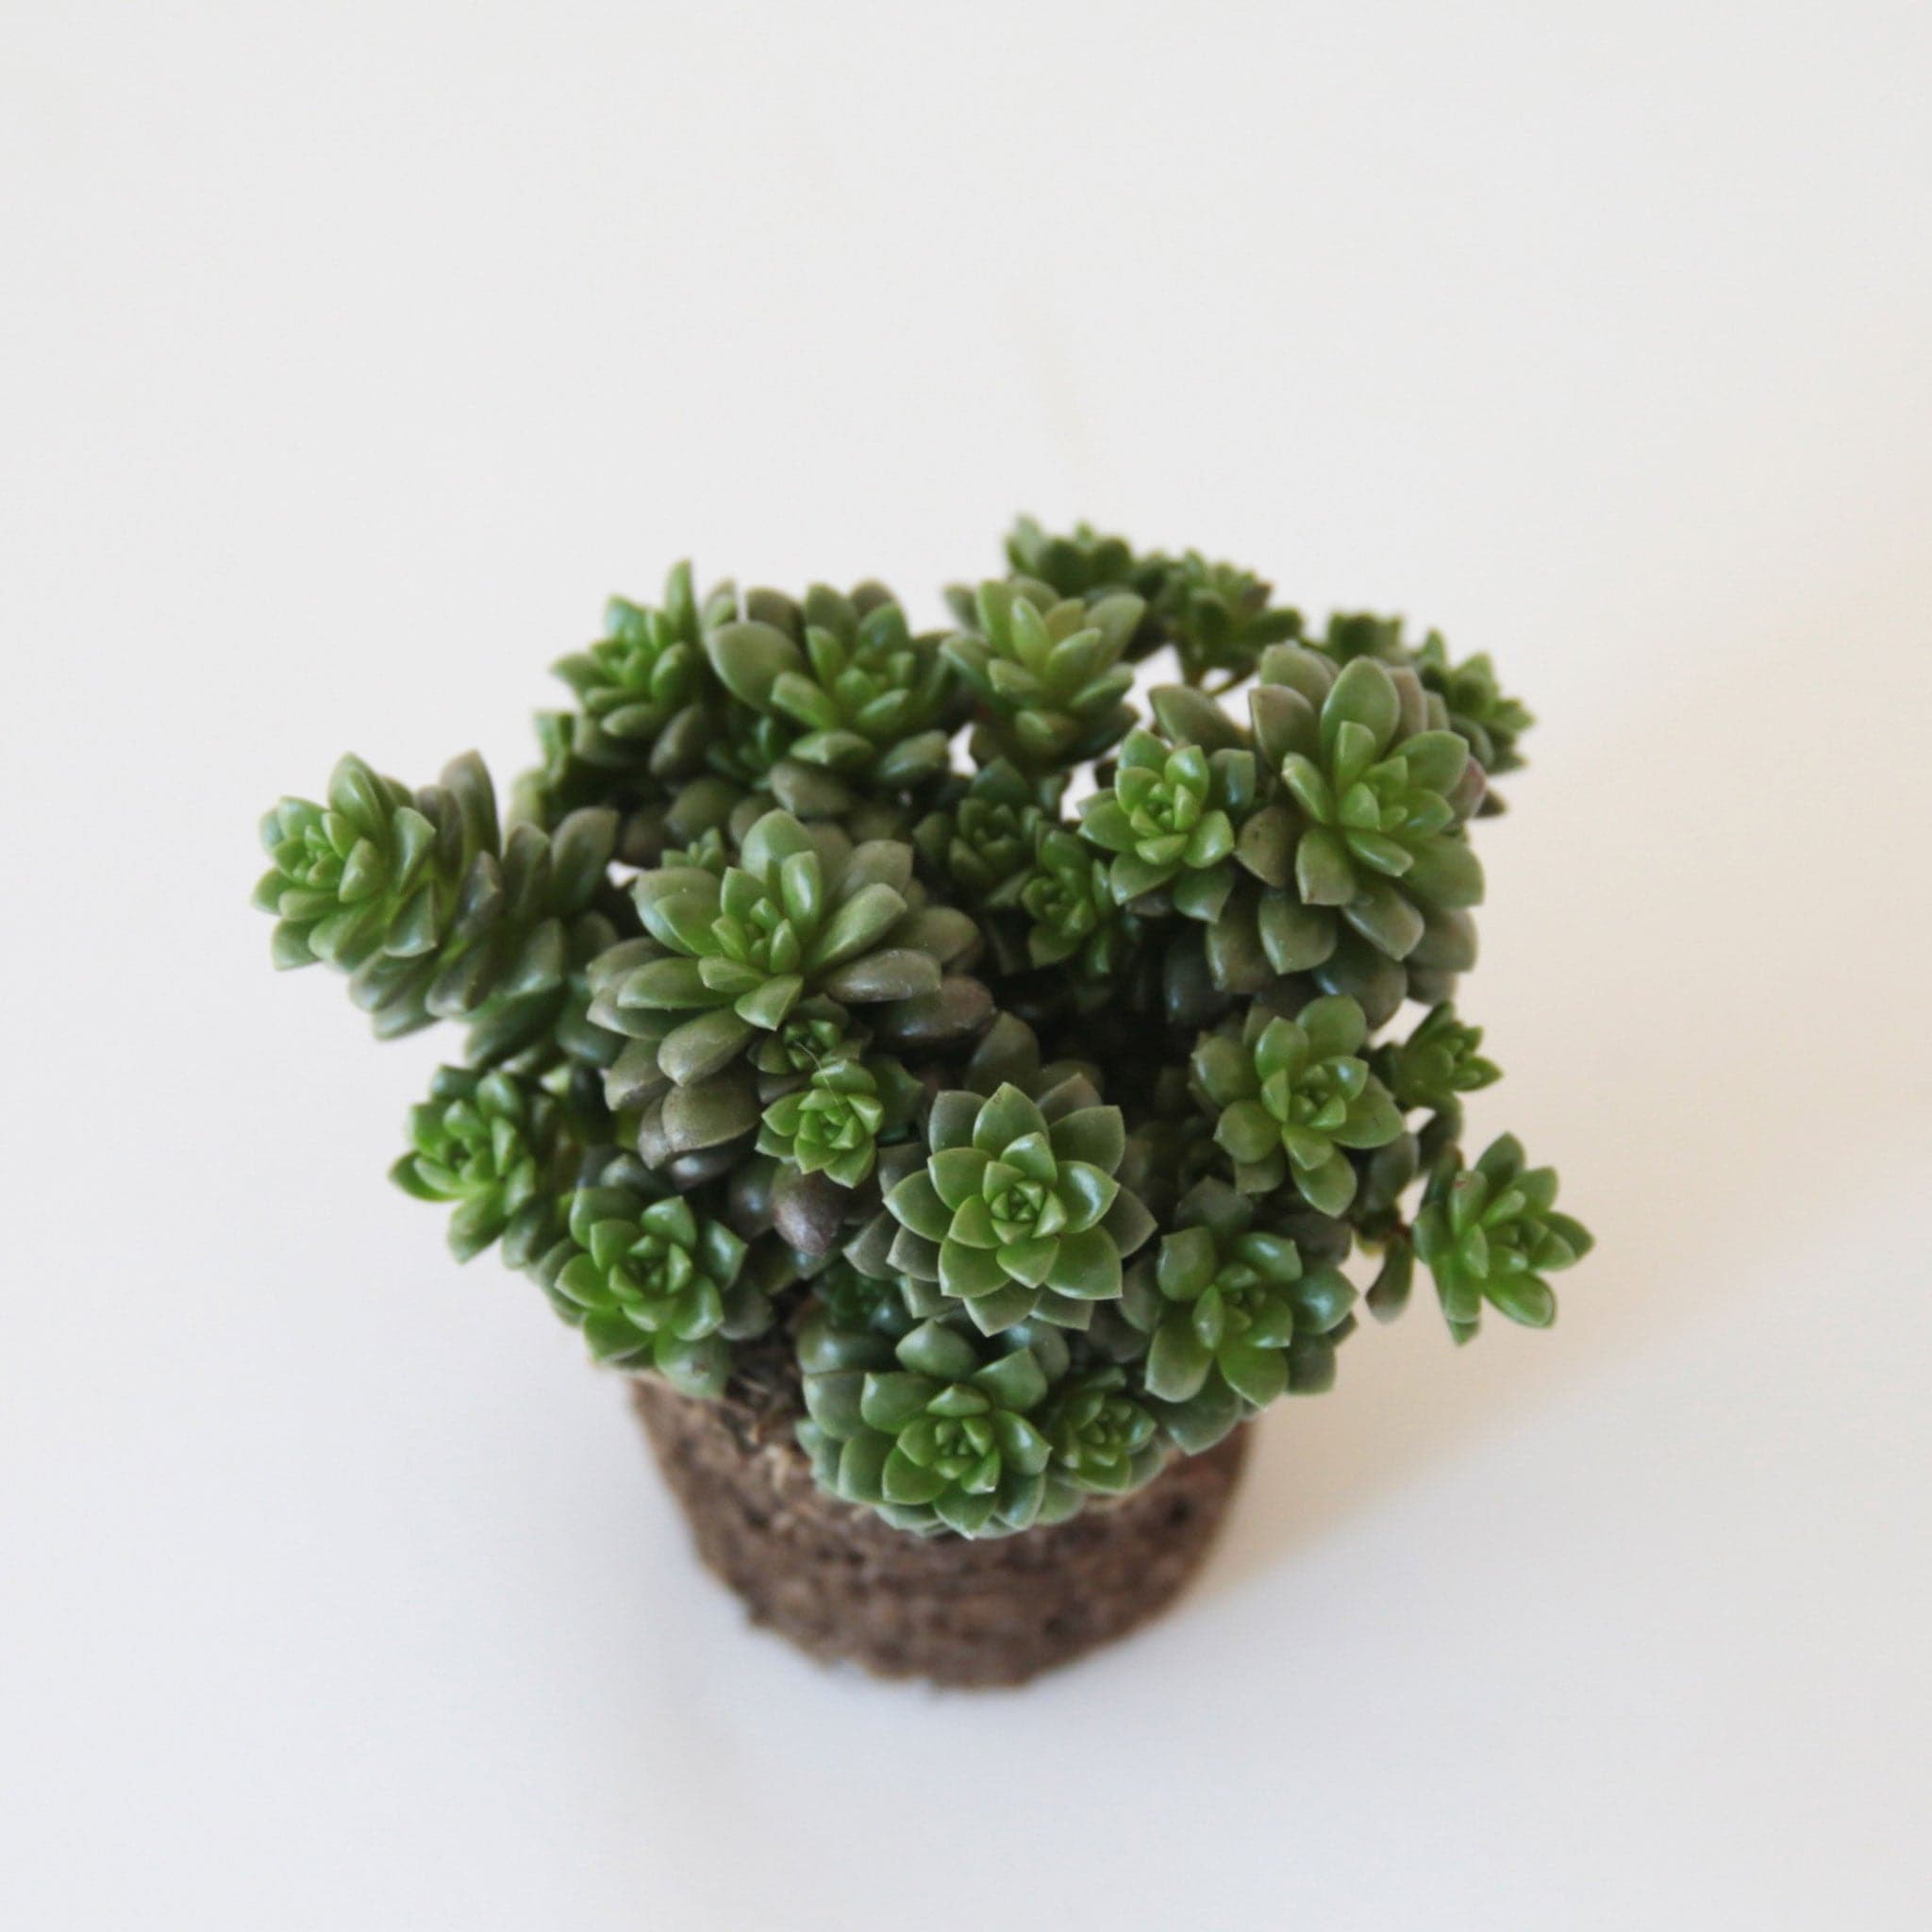 On a white background is a Cremnosedum Little Gem Succulent. Each succulent varies in shape and color.